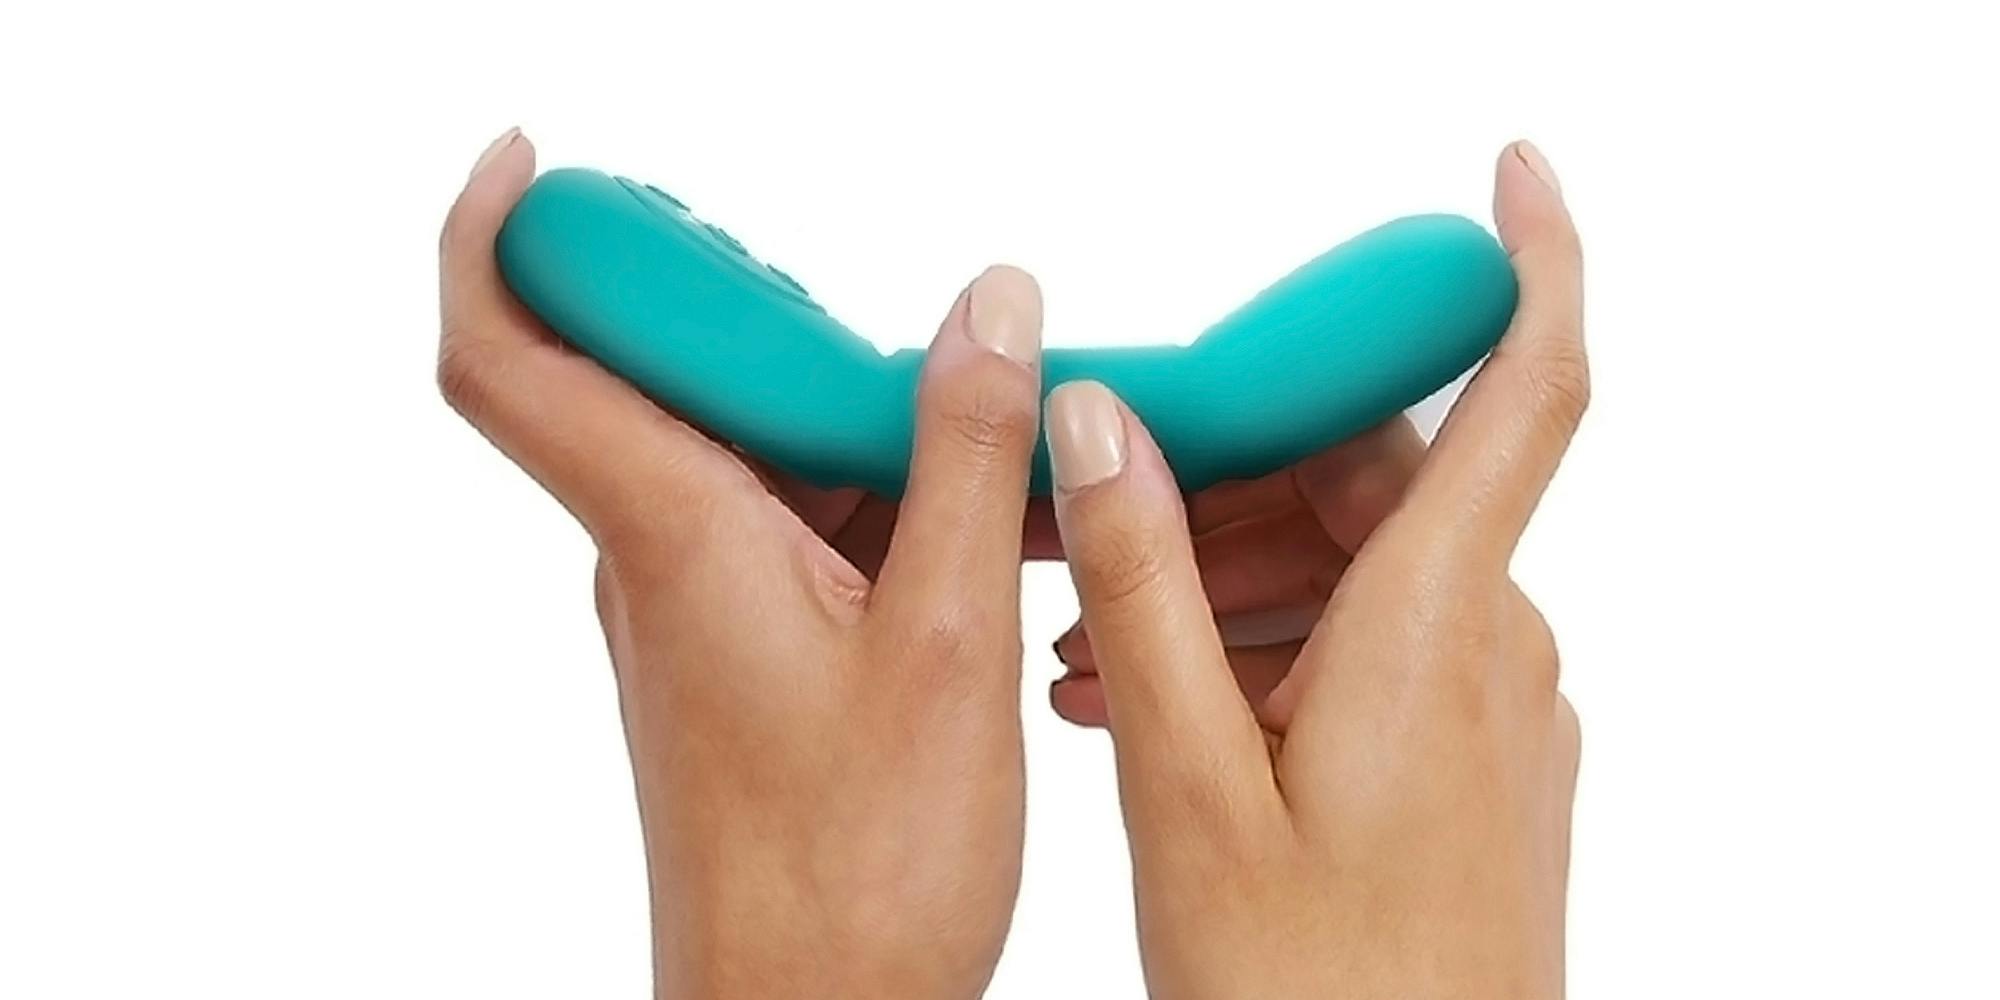 MysteryVibe Poco is the perfect flexible vibrator for small hands